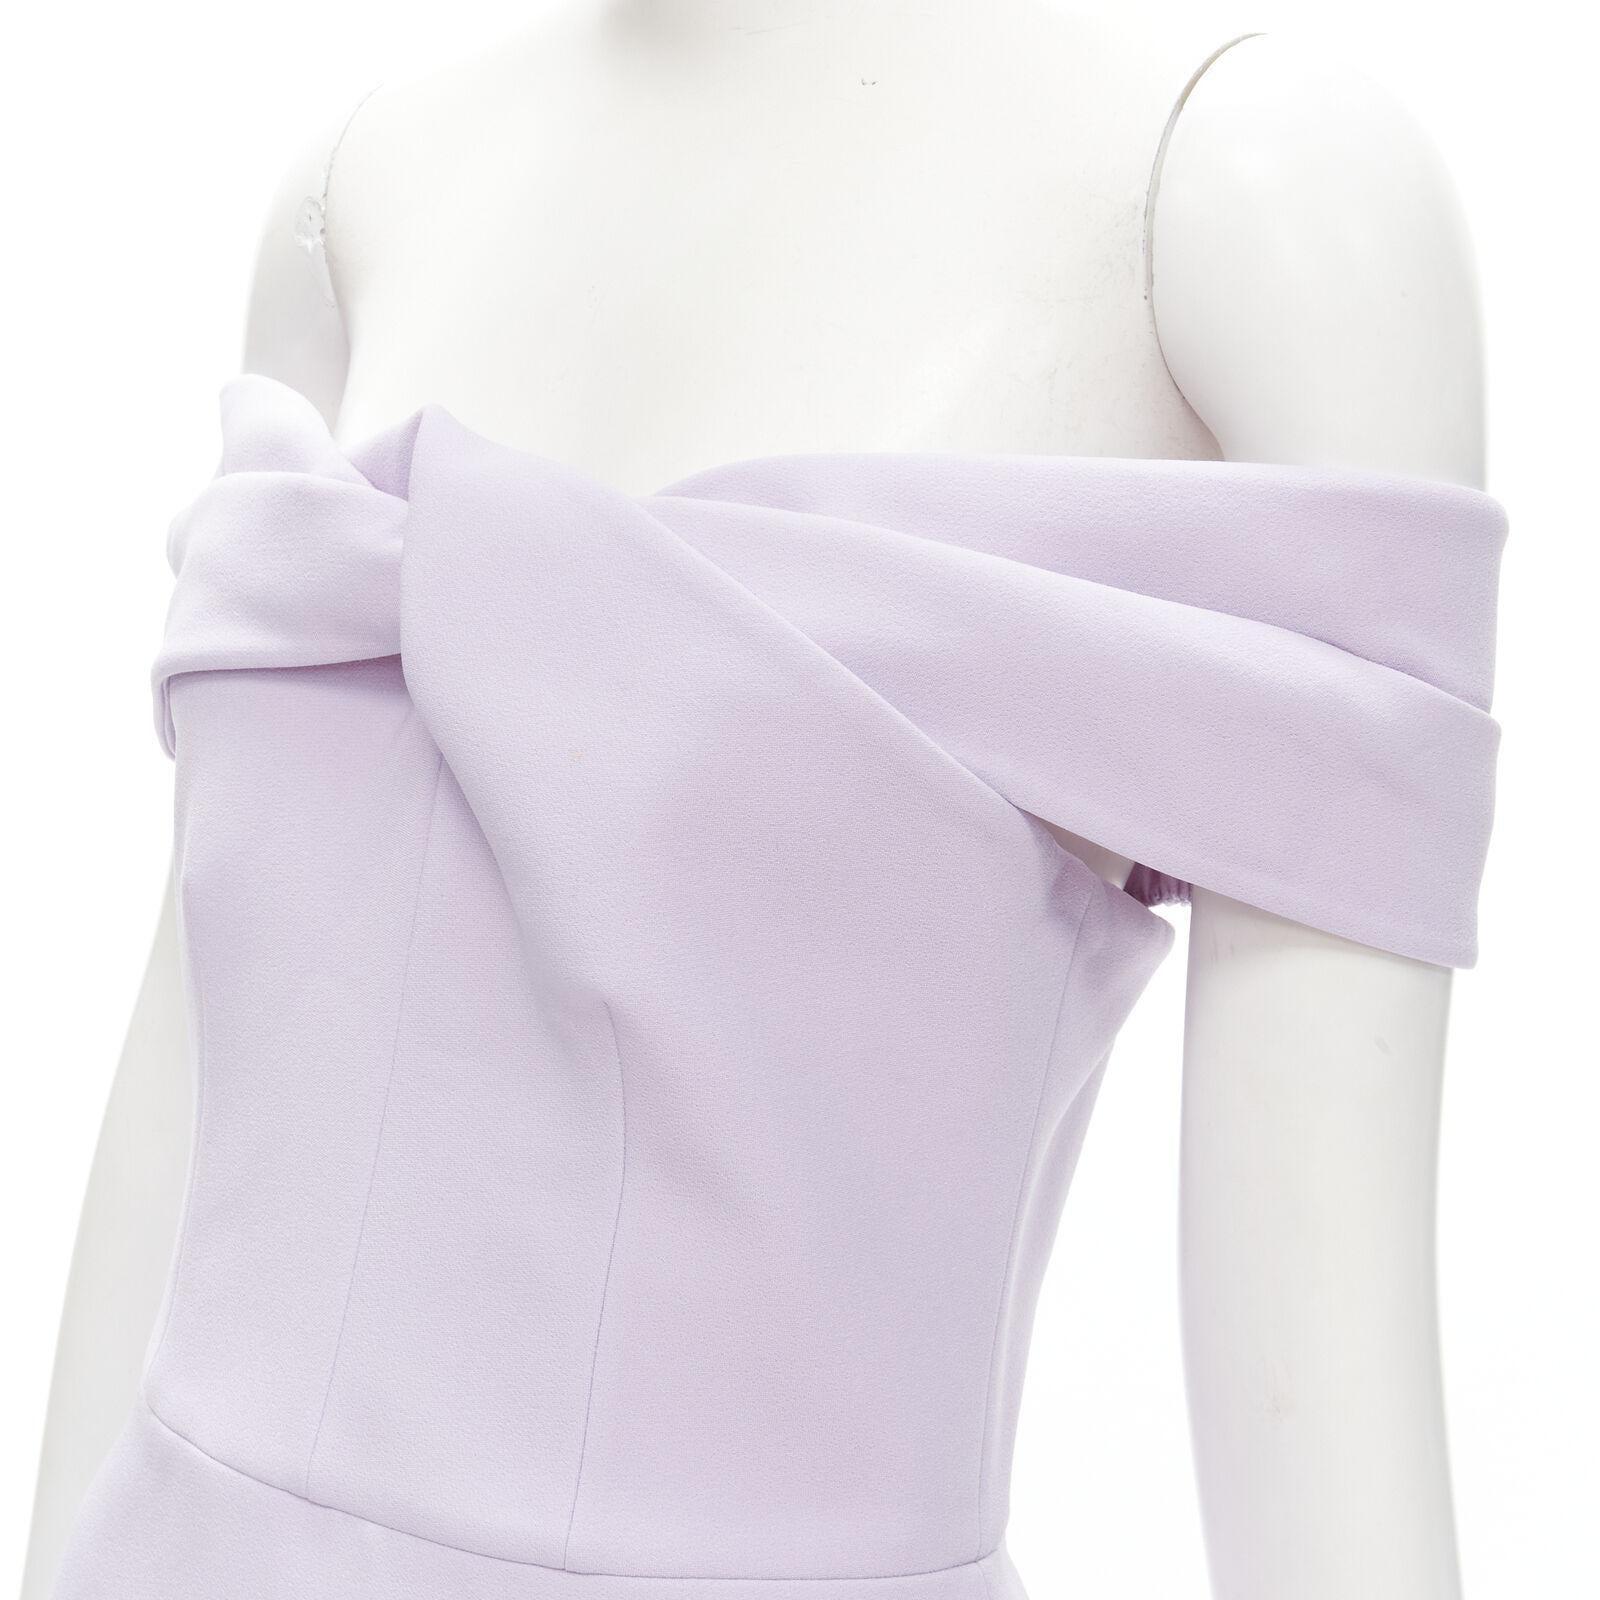 SAFIYAA purple drop shoulder peplum top US6 flared bottom US8 set
Reference: KNLM/A00043
Brand: Safiyaa
Material: Polyester, Blend
Color: Purple
Pattern: Solid
Closure: Zip
Lining: Polyester
Made in: Turkey

CONDITION:
Condition: Excellent, this